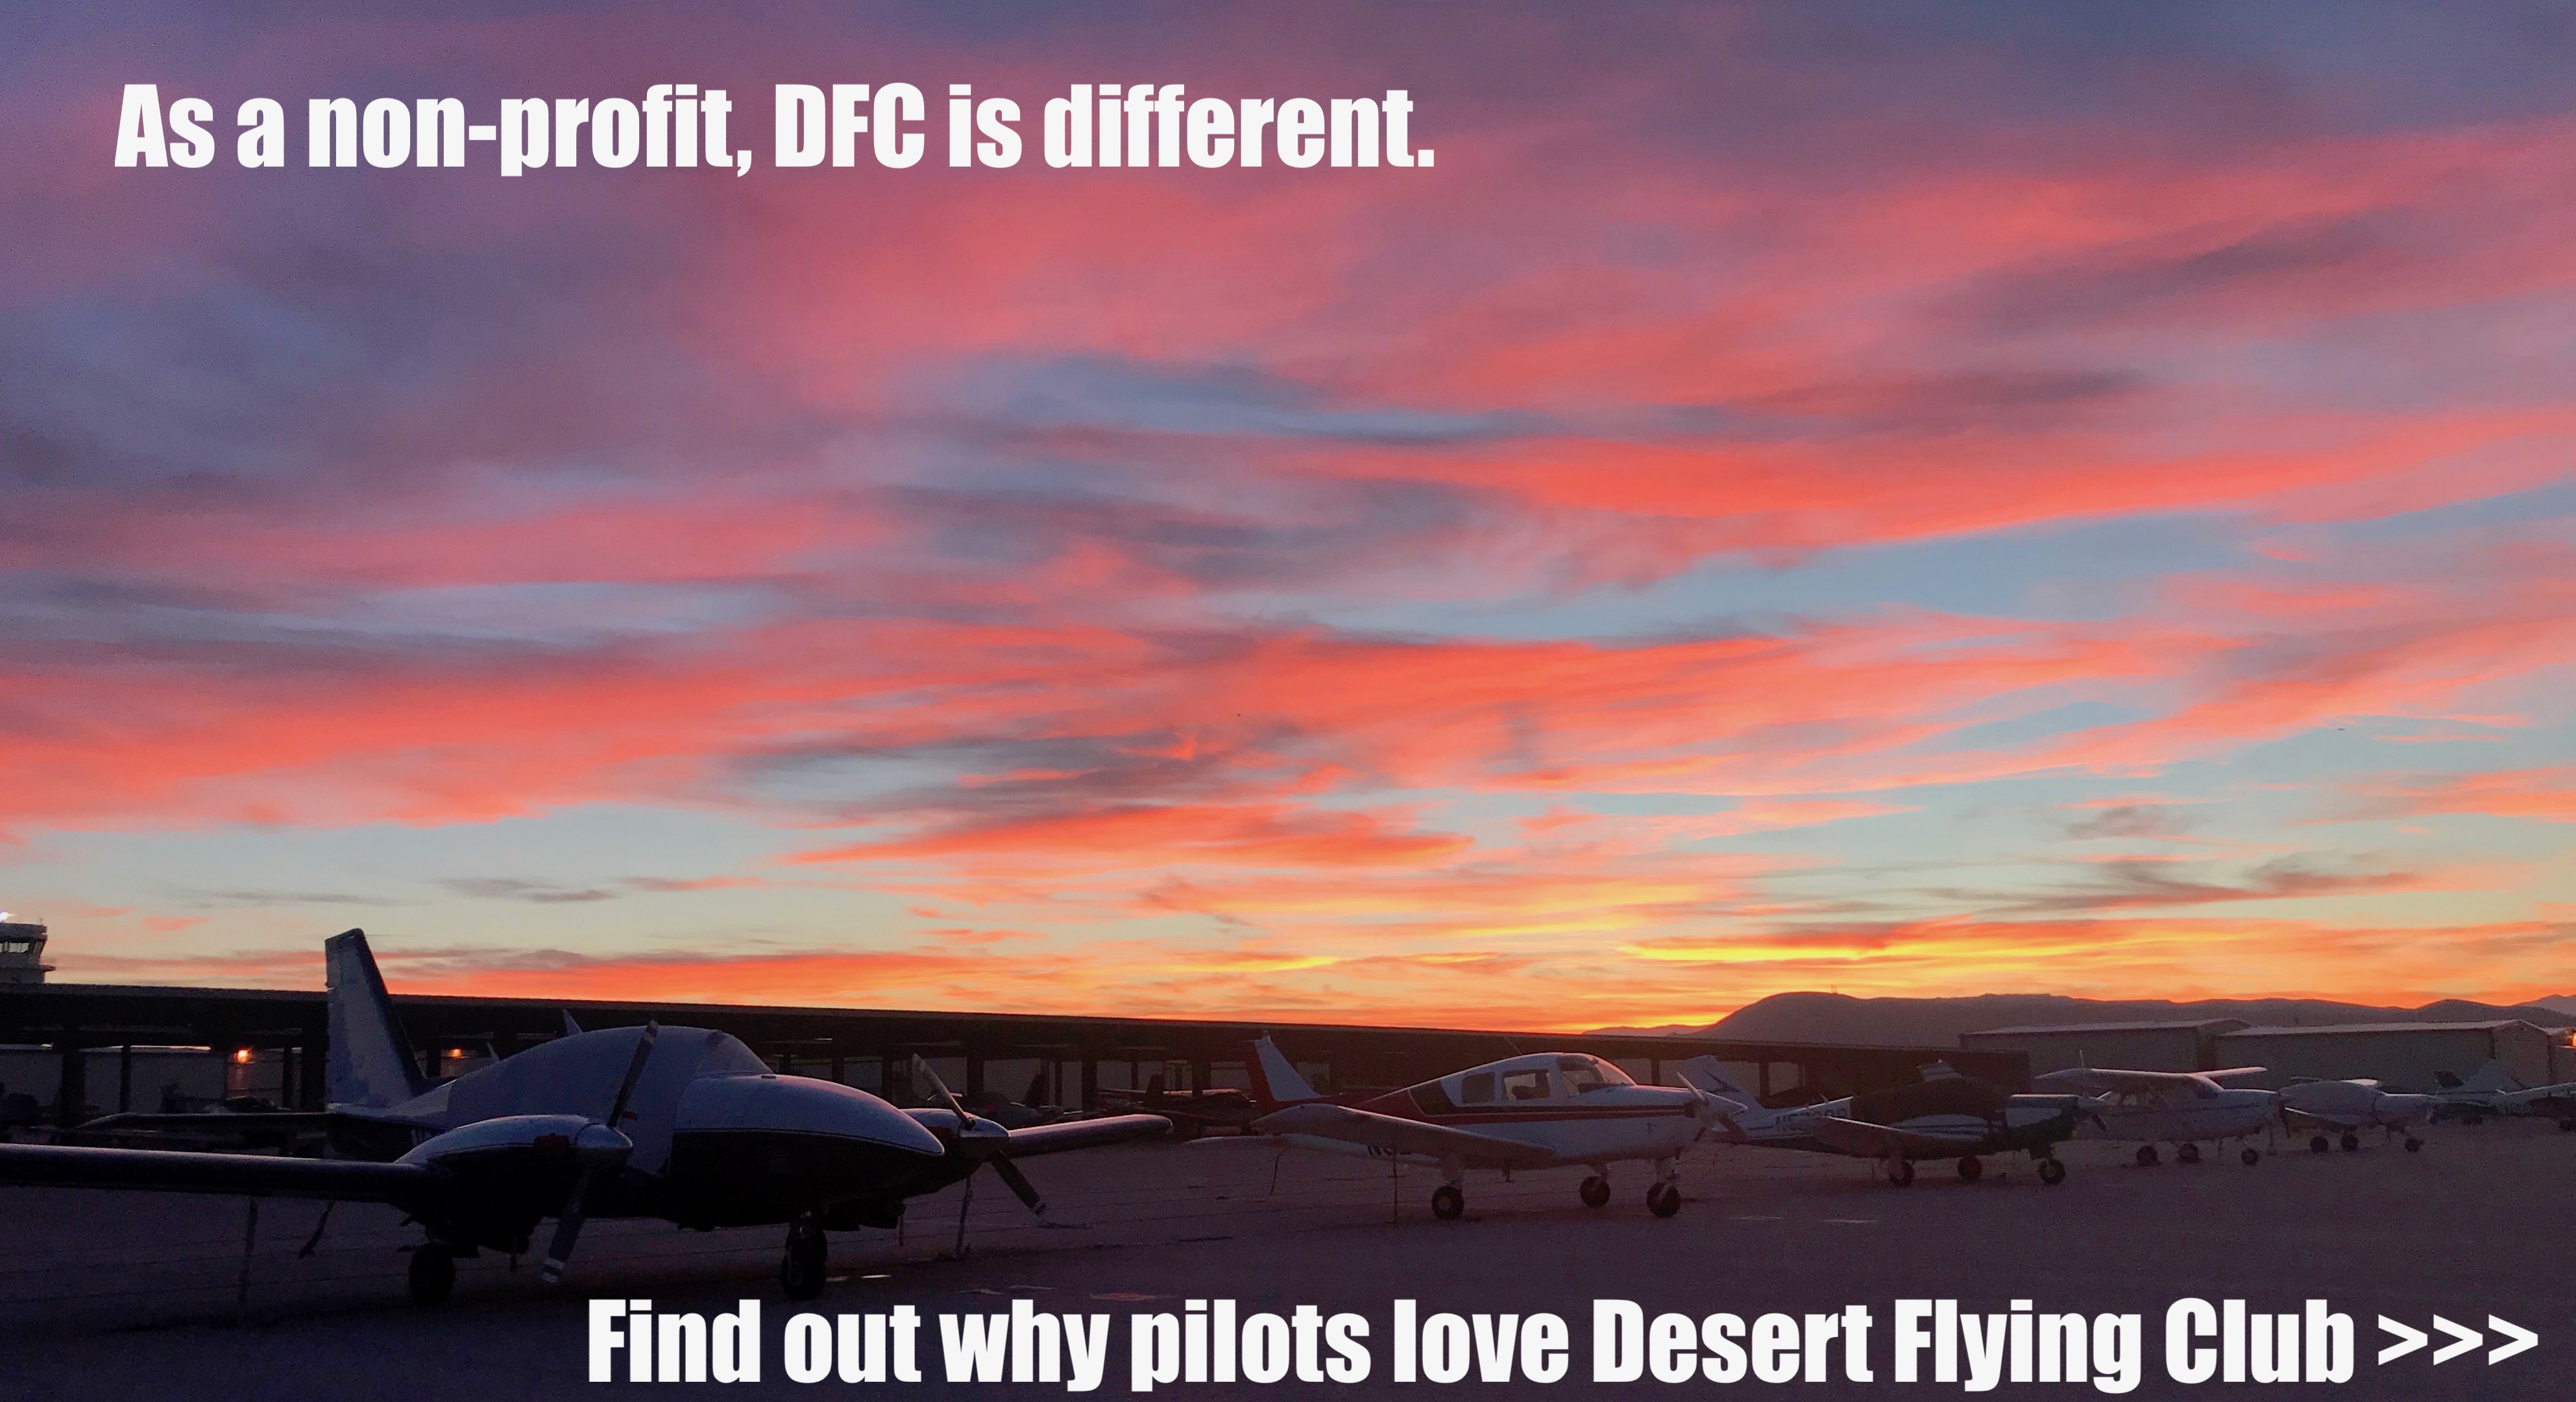 Desert Flying Club, Learn to Fly